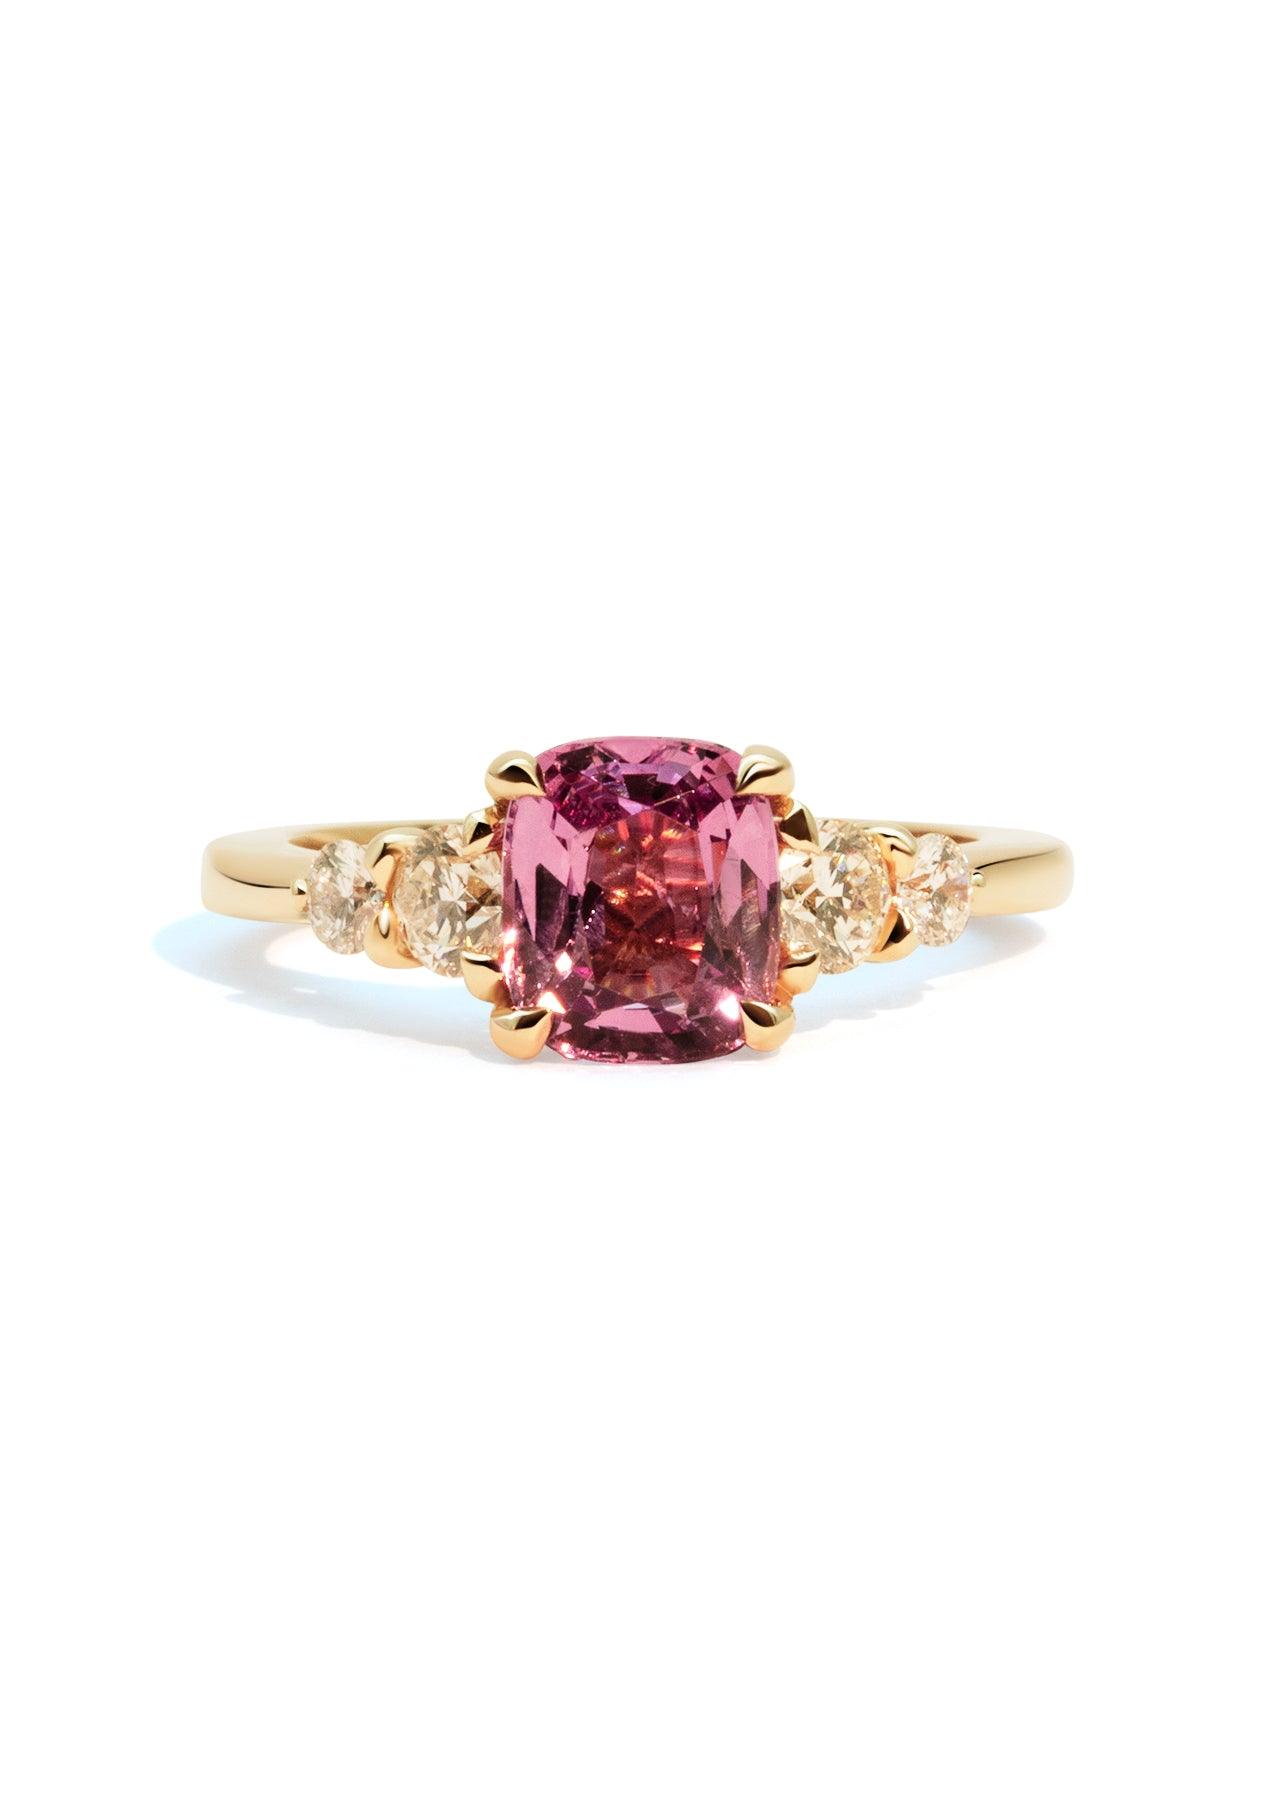 The Vera 1.94ct Spinel Ring